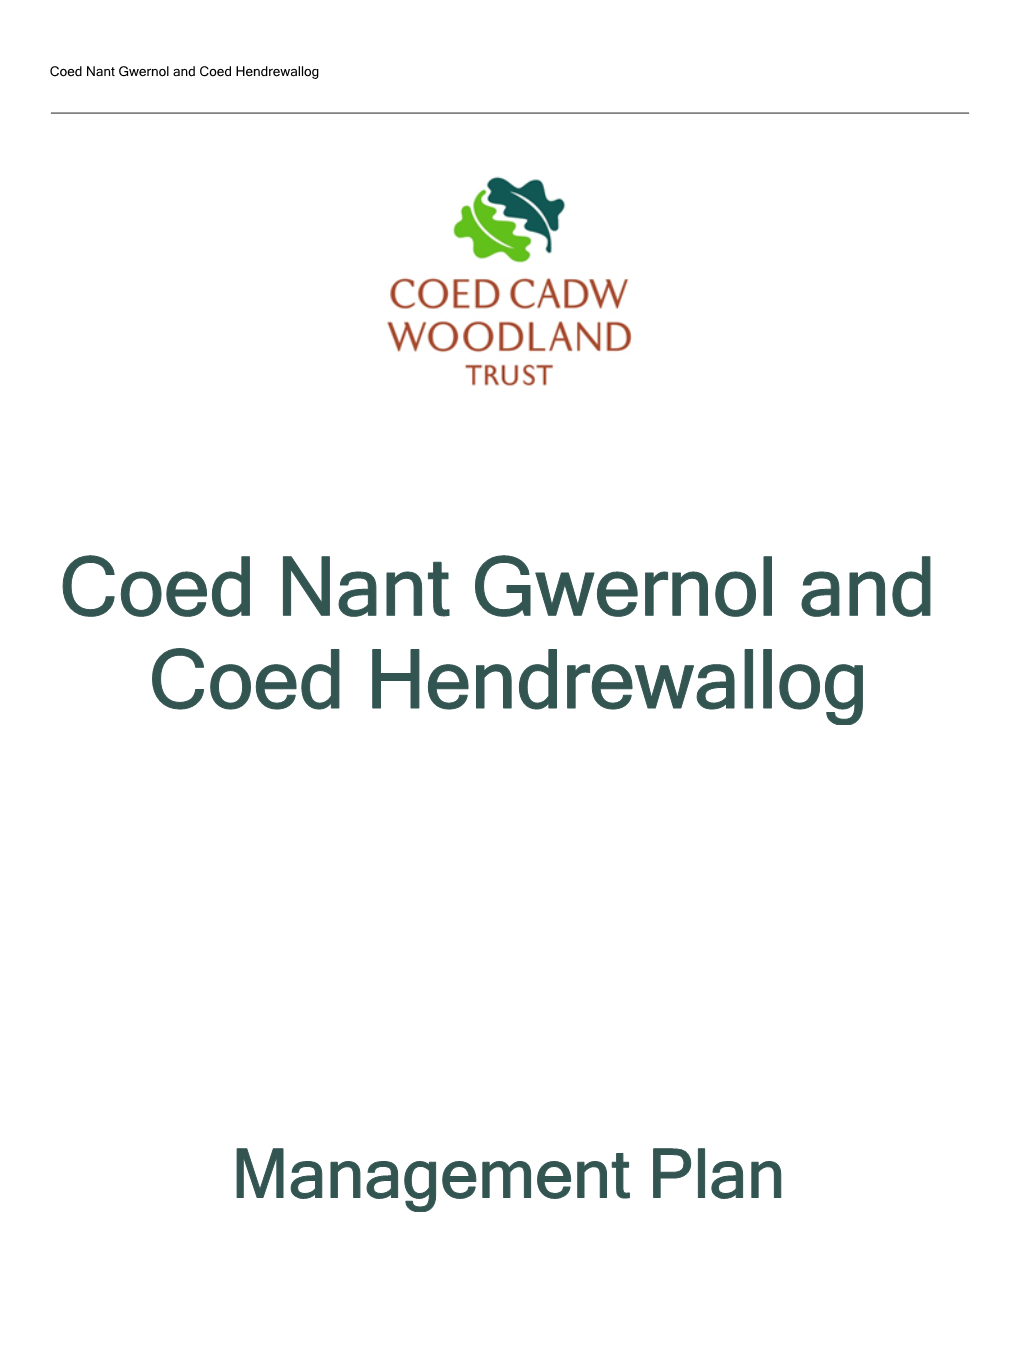 Download Coed Nant Gwernol and Coed Hendrewallog Management